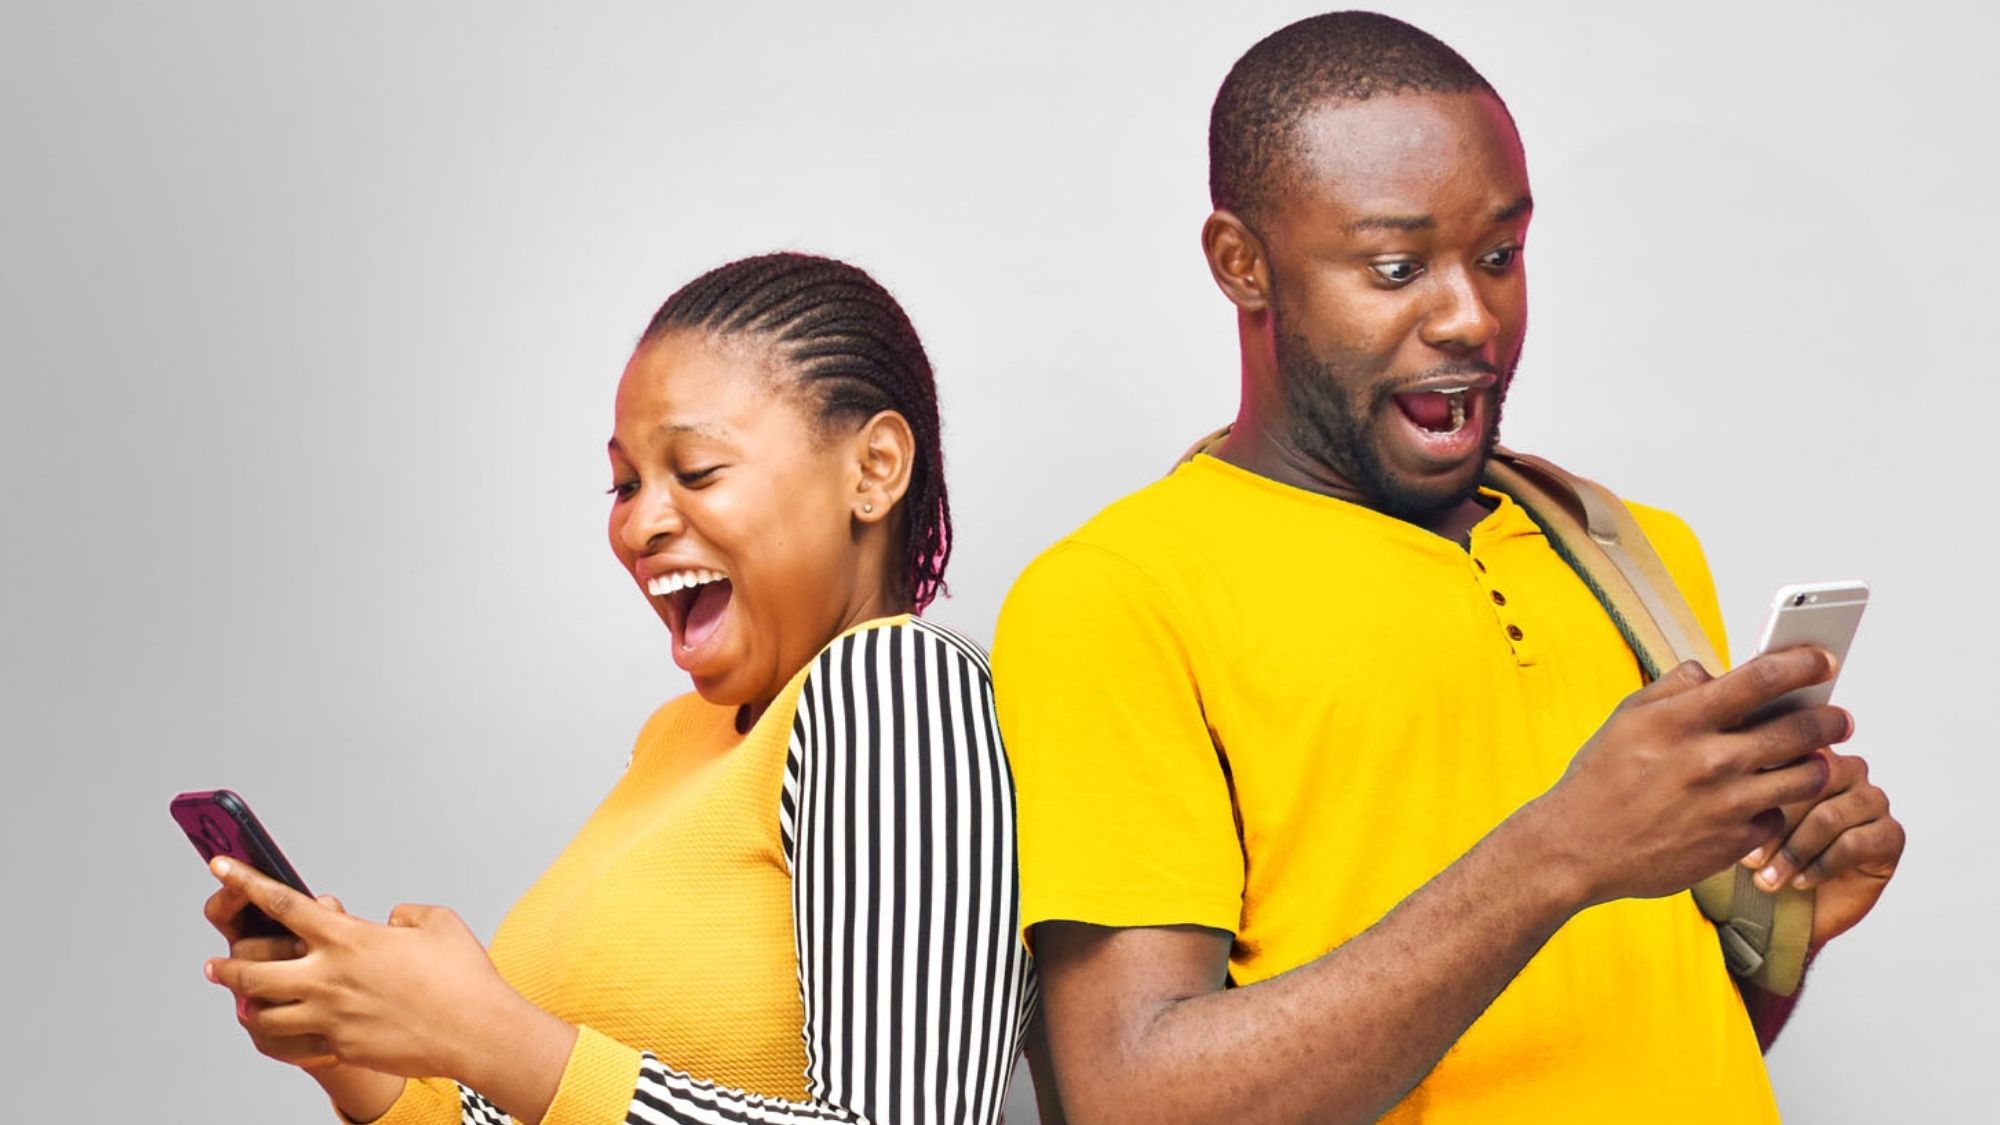 MTN retains its position as the most valuable brand in Africa